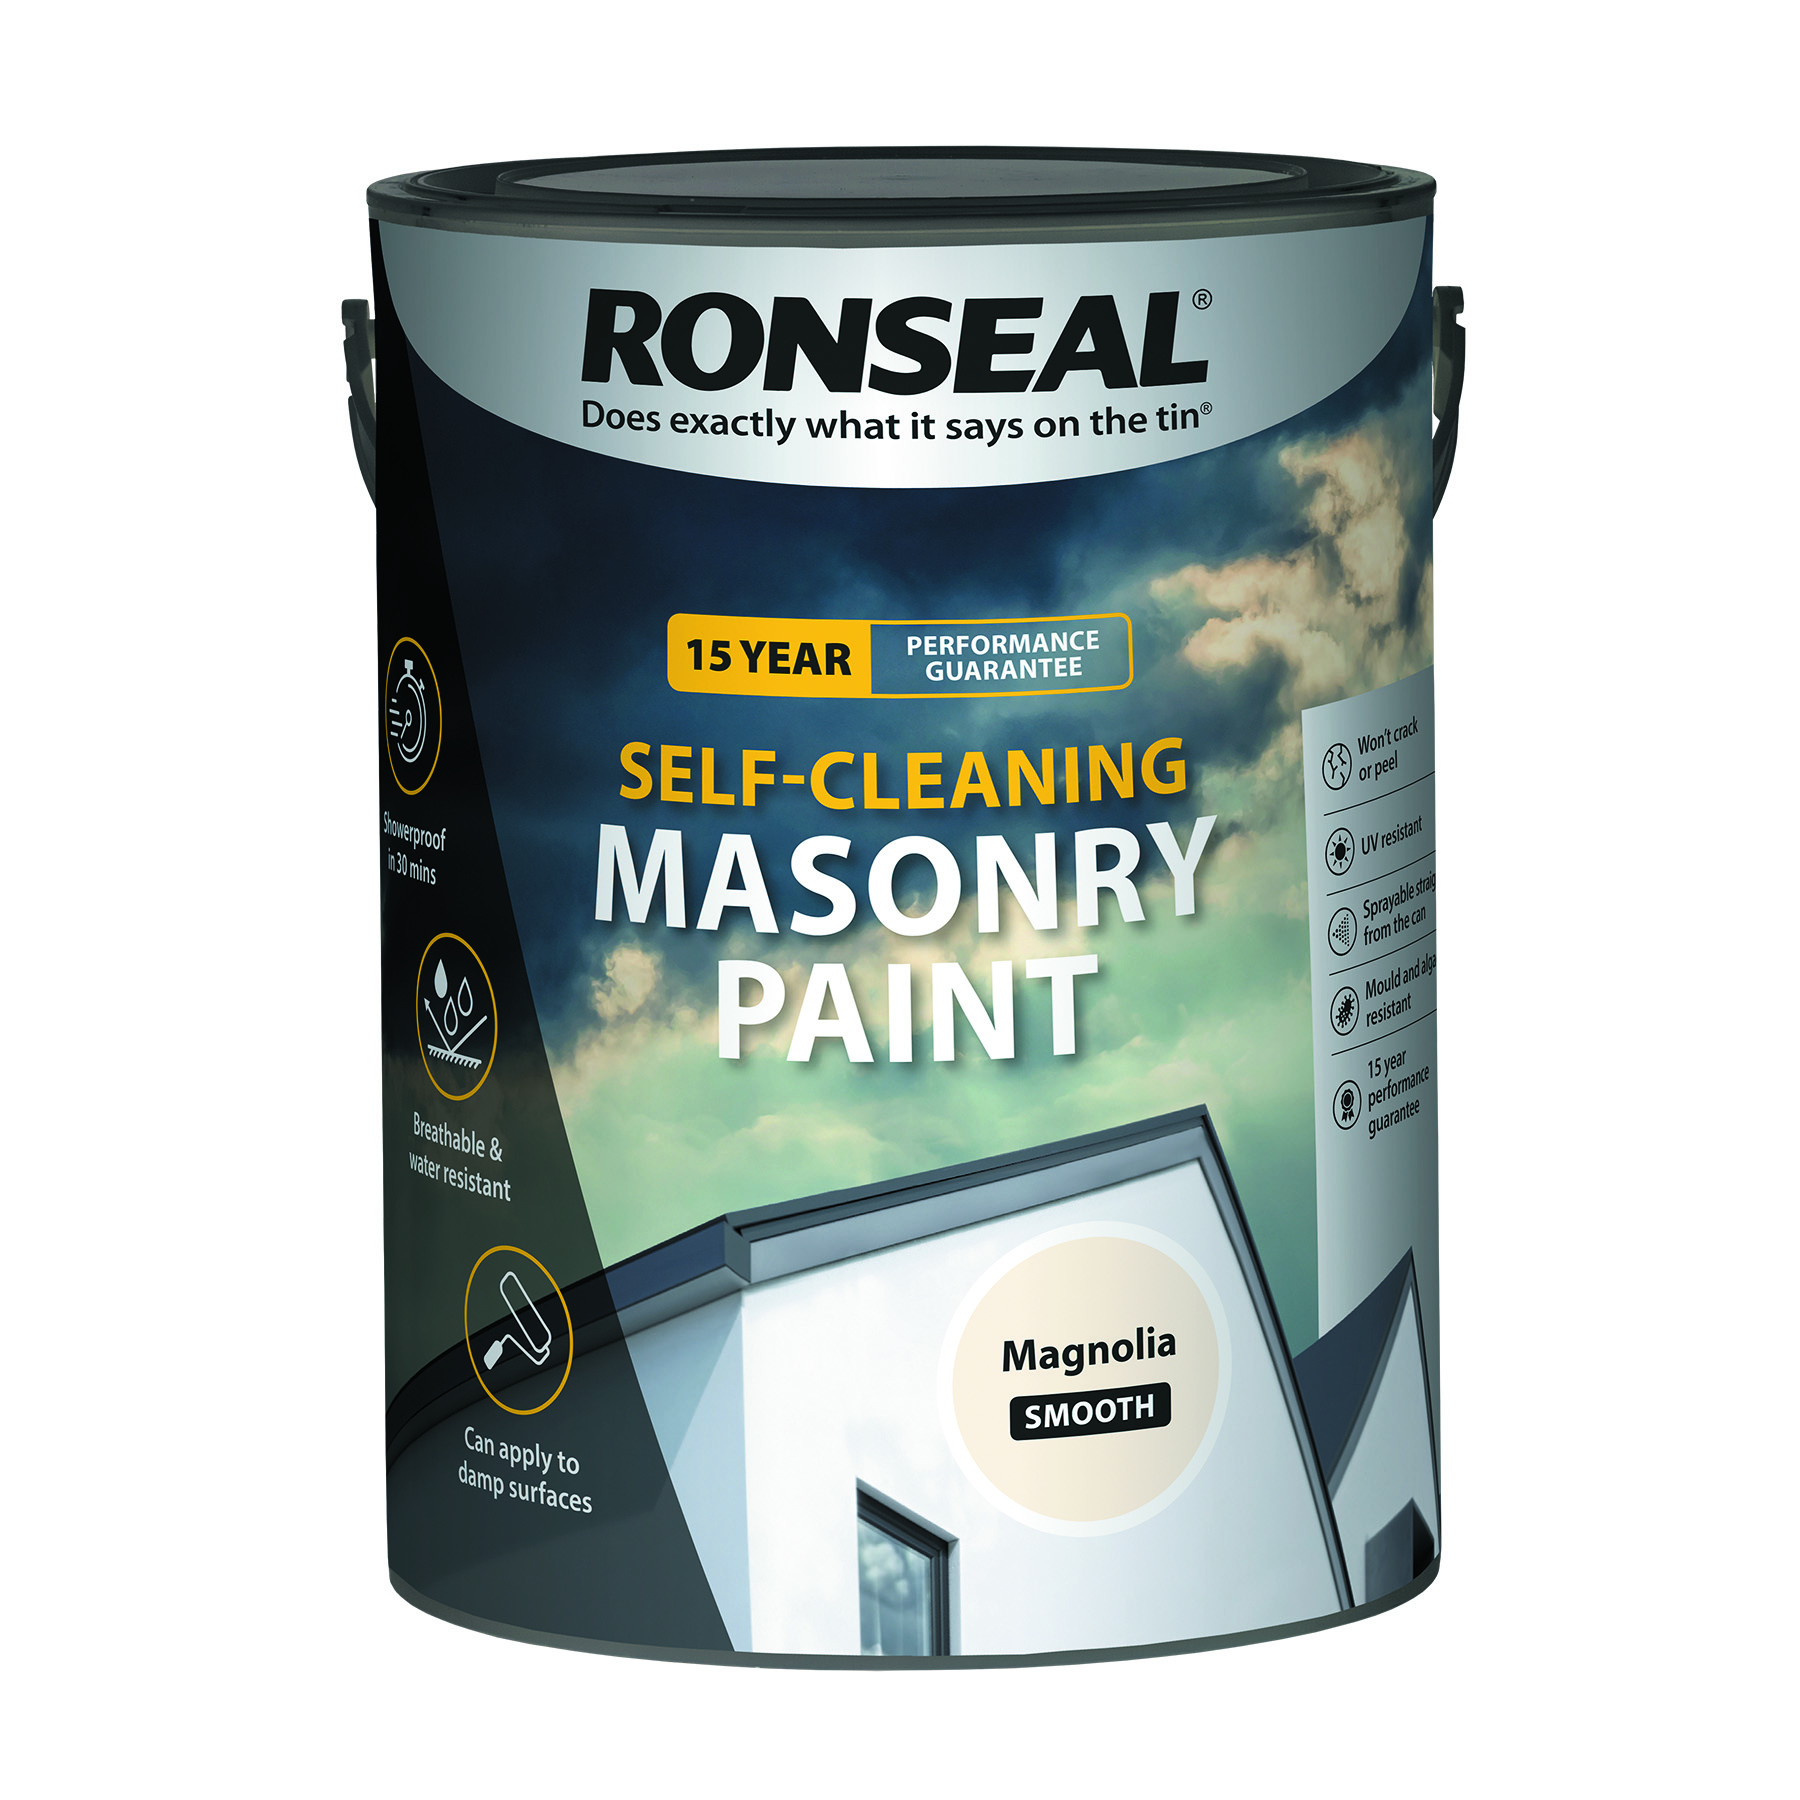 Ronseal Self-cleaning Masonry Paint - Magnolia - 5l